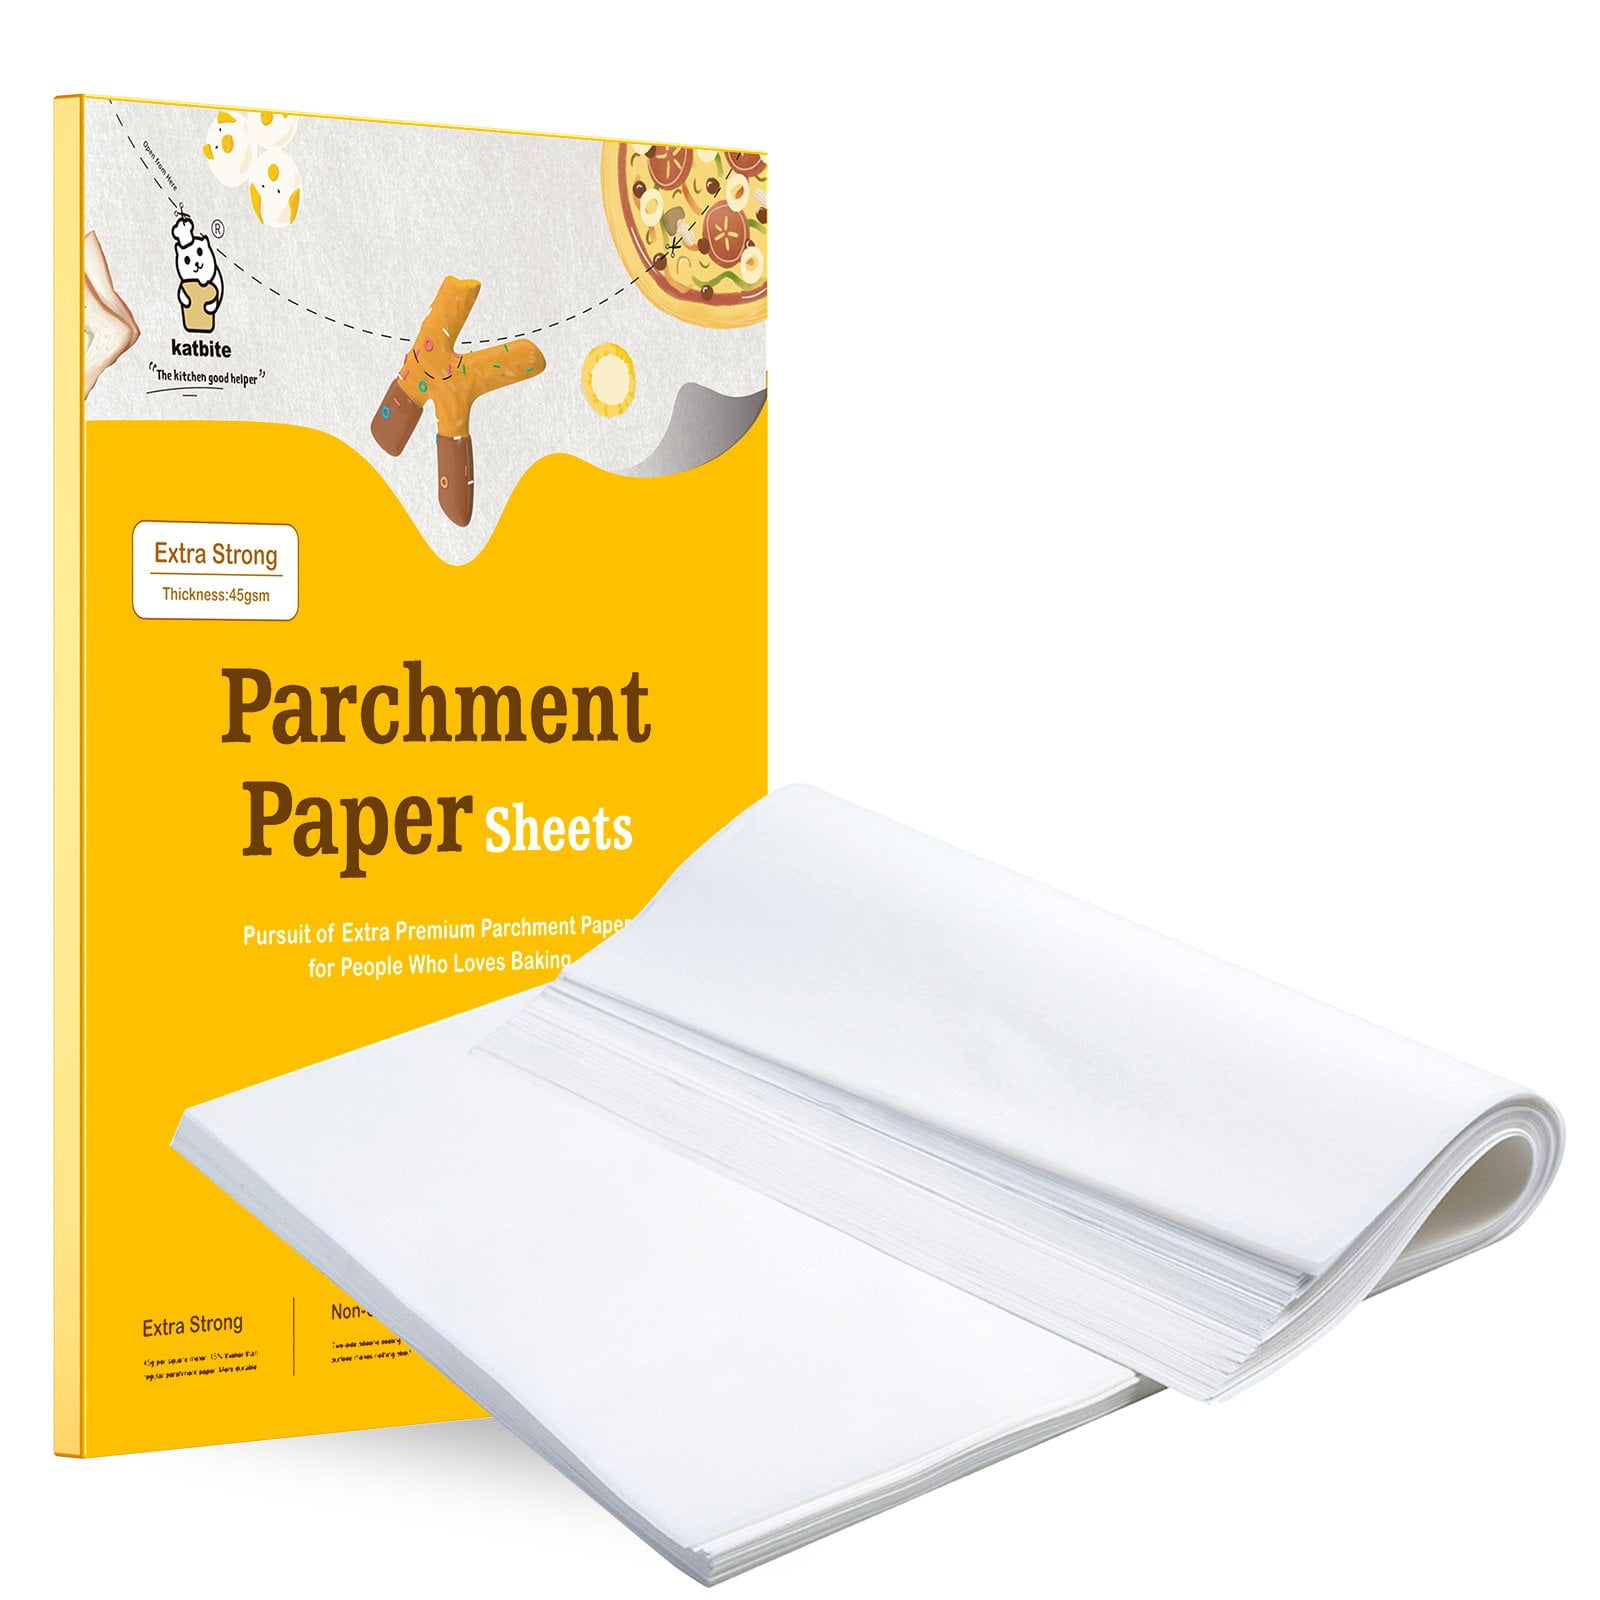 Comfy Package 12 x 16 inch - 200 Countprecut Baking Parchment Paper Sheets Unbleached Non-Stick Sheets for Baking & Cooking - Kraft